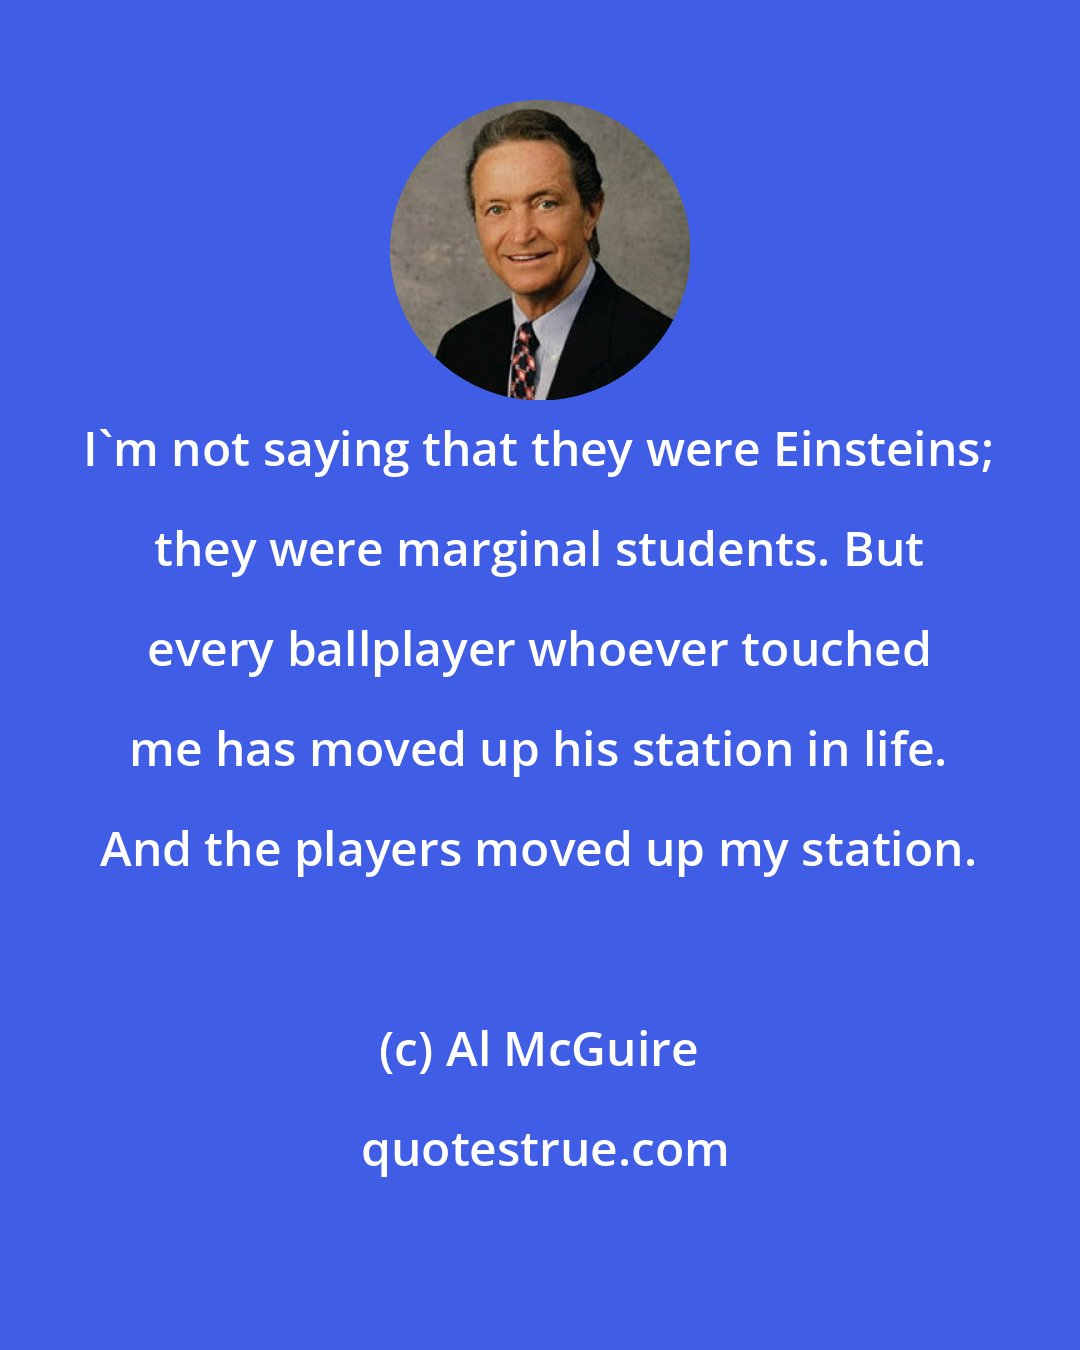 Al McGuire: I'm not saying that they were Einsteins; they were marginal students. But every ballplayer whoever touched me has moved up his station in life. And the players moved up my station.